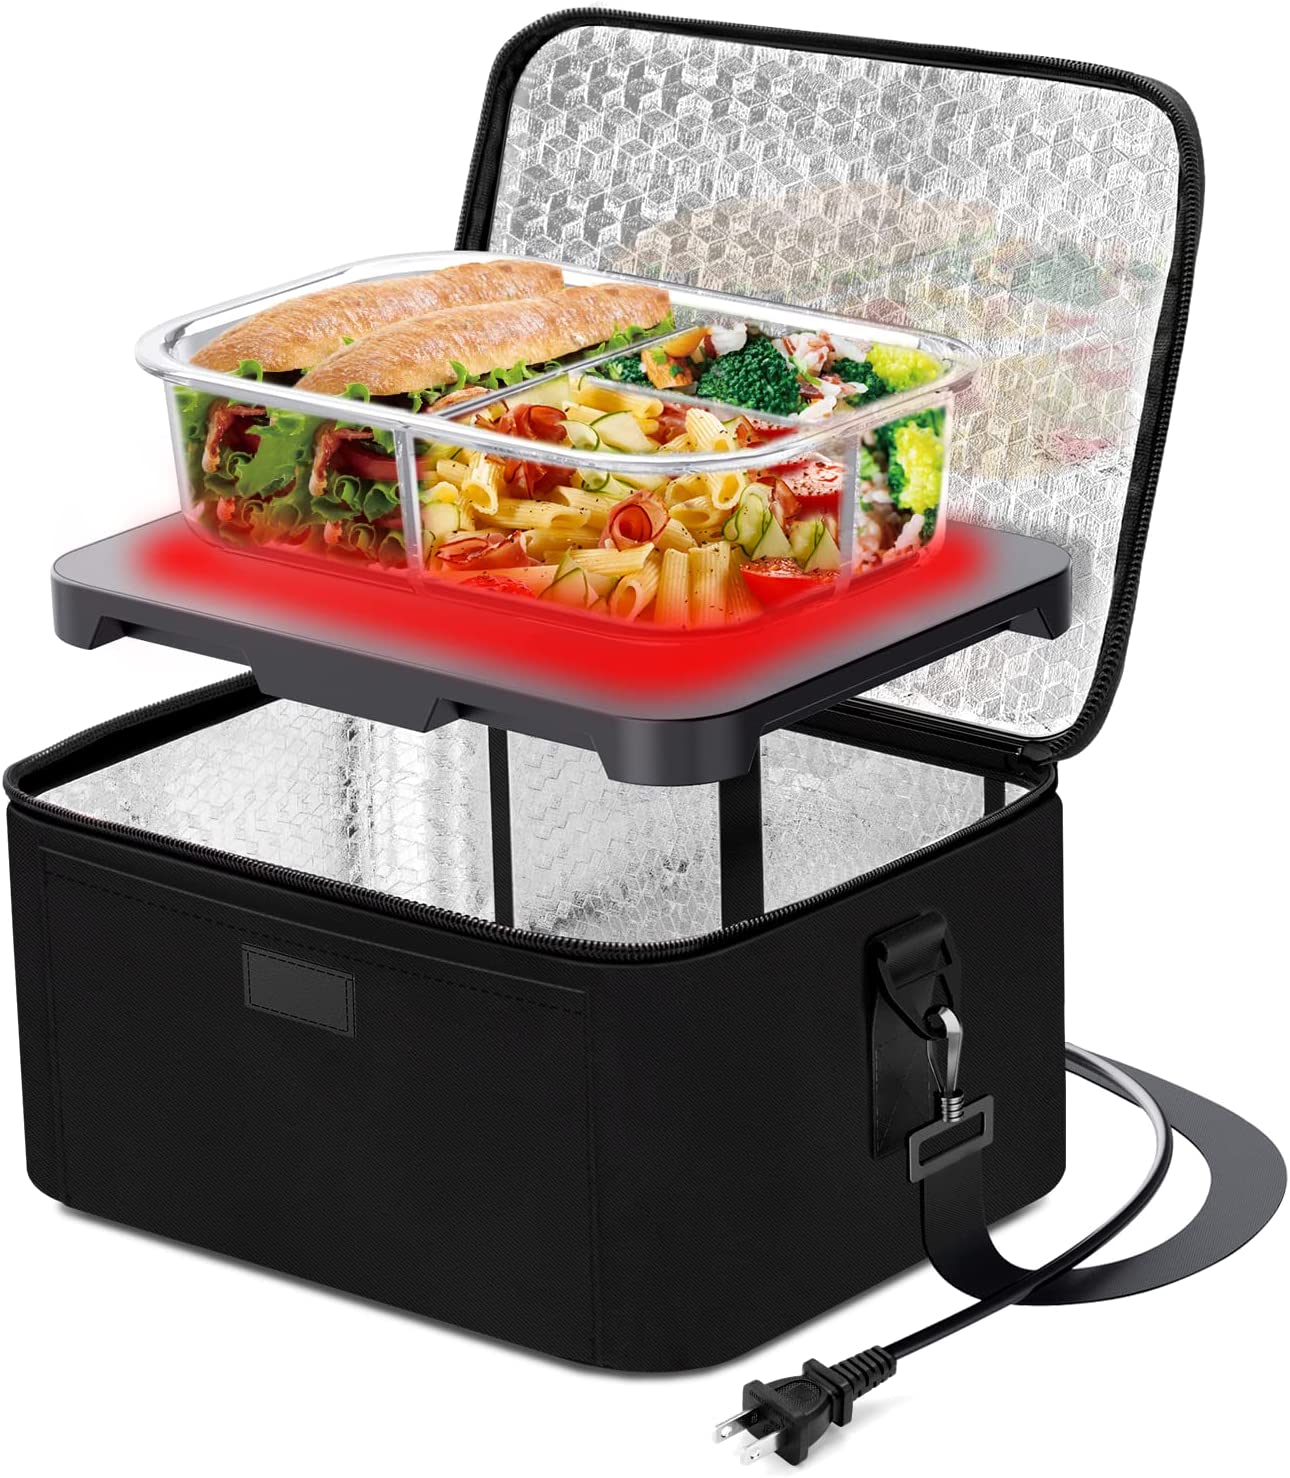 Aotto Compact Fast Heat Portable Microwave